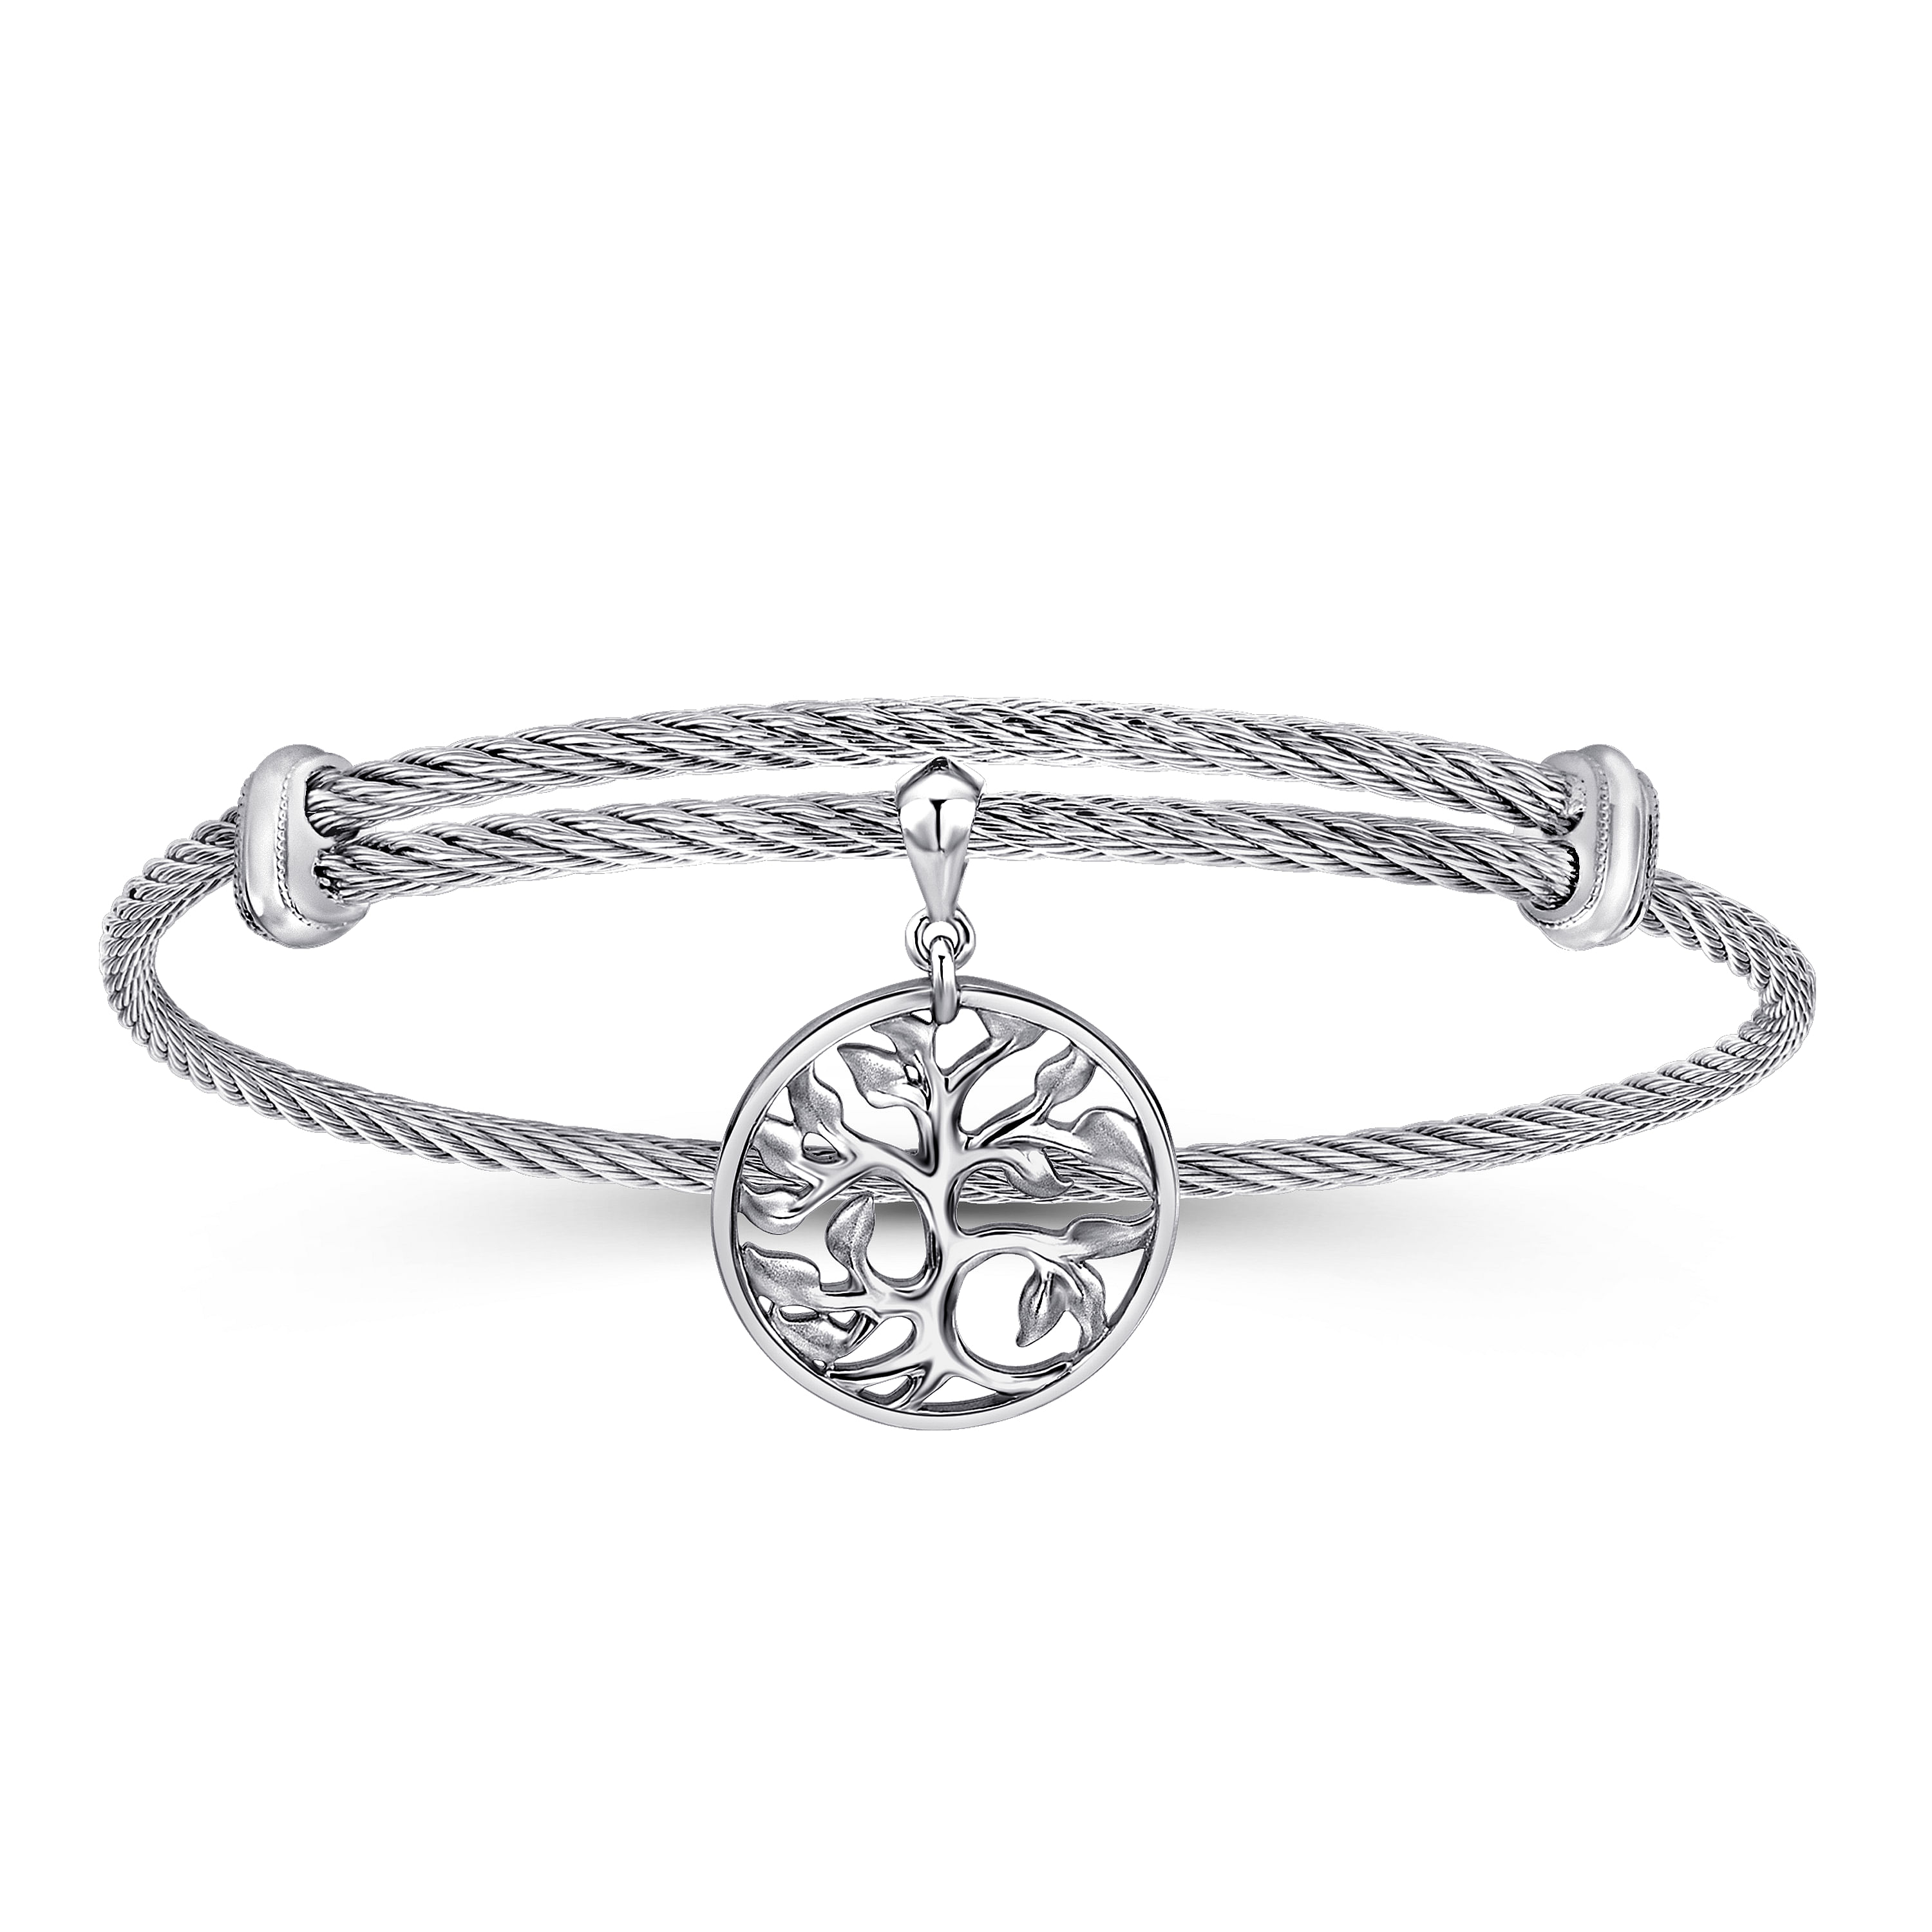 Adjustable Twisted Cable Stainless Steel Bangle with Sterling Silver Tree of Life Charm